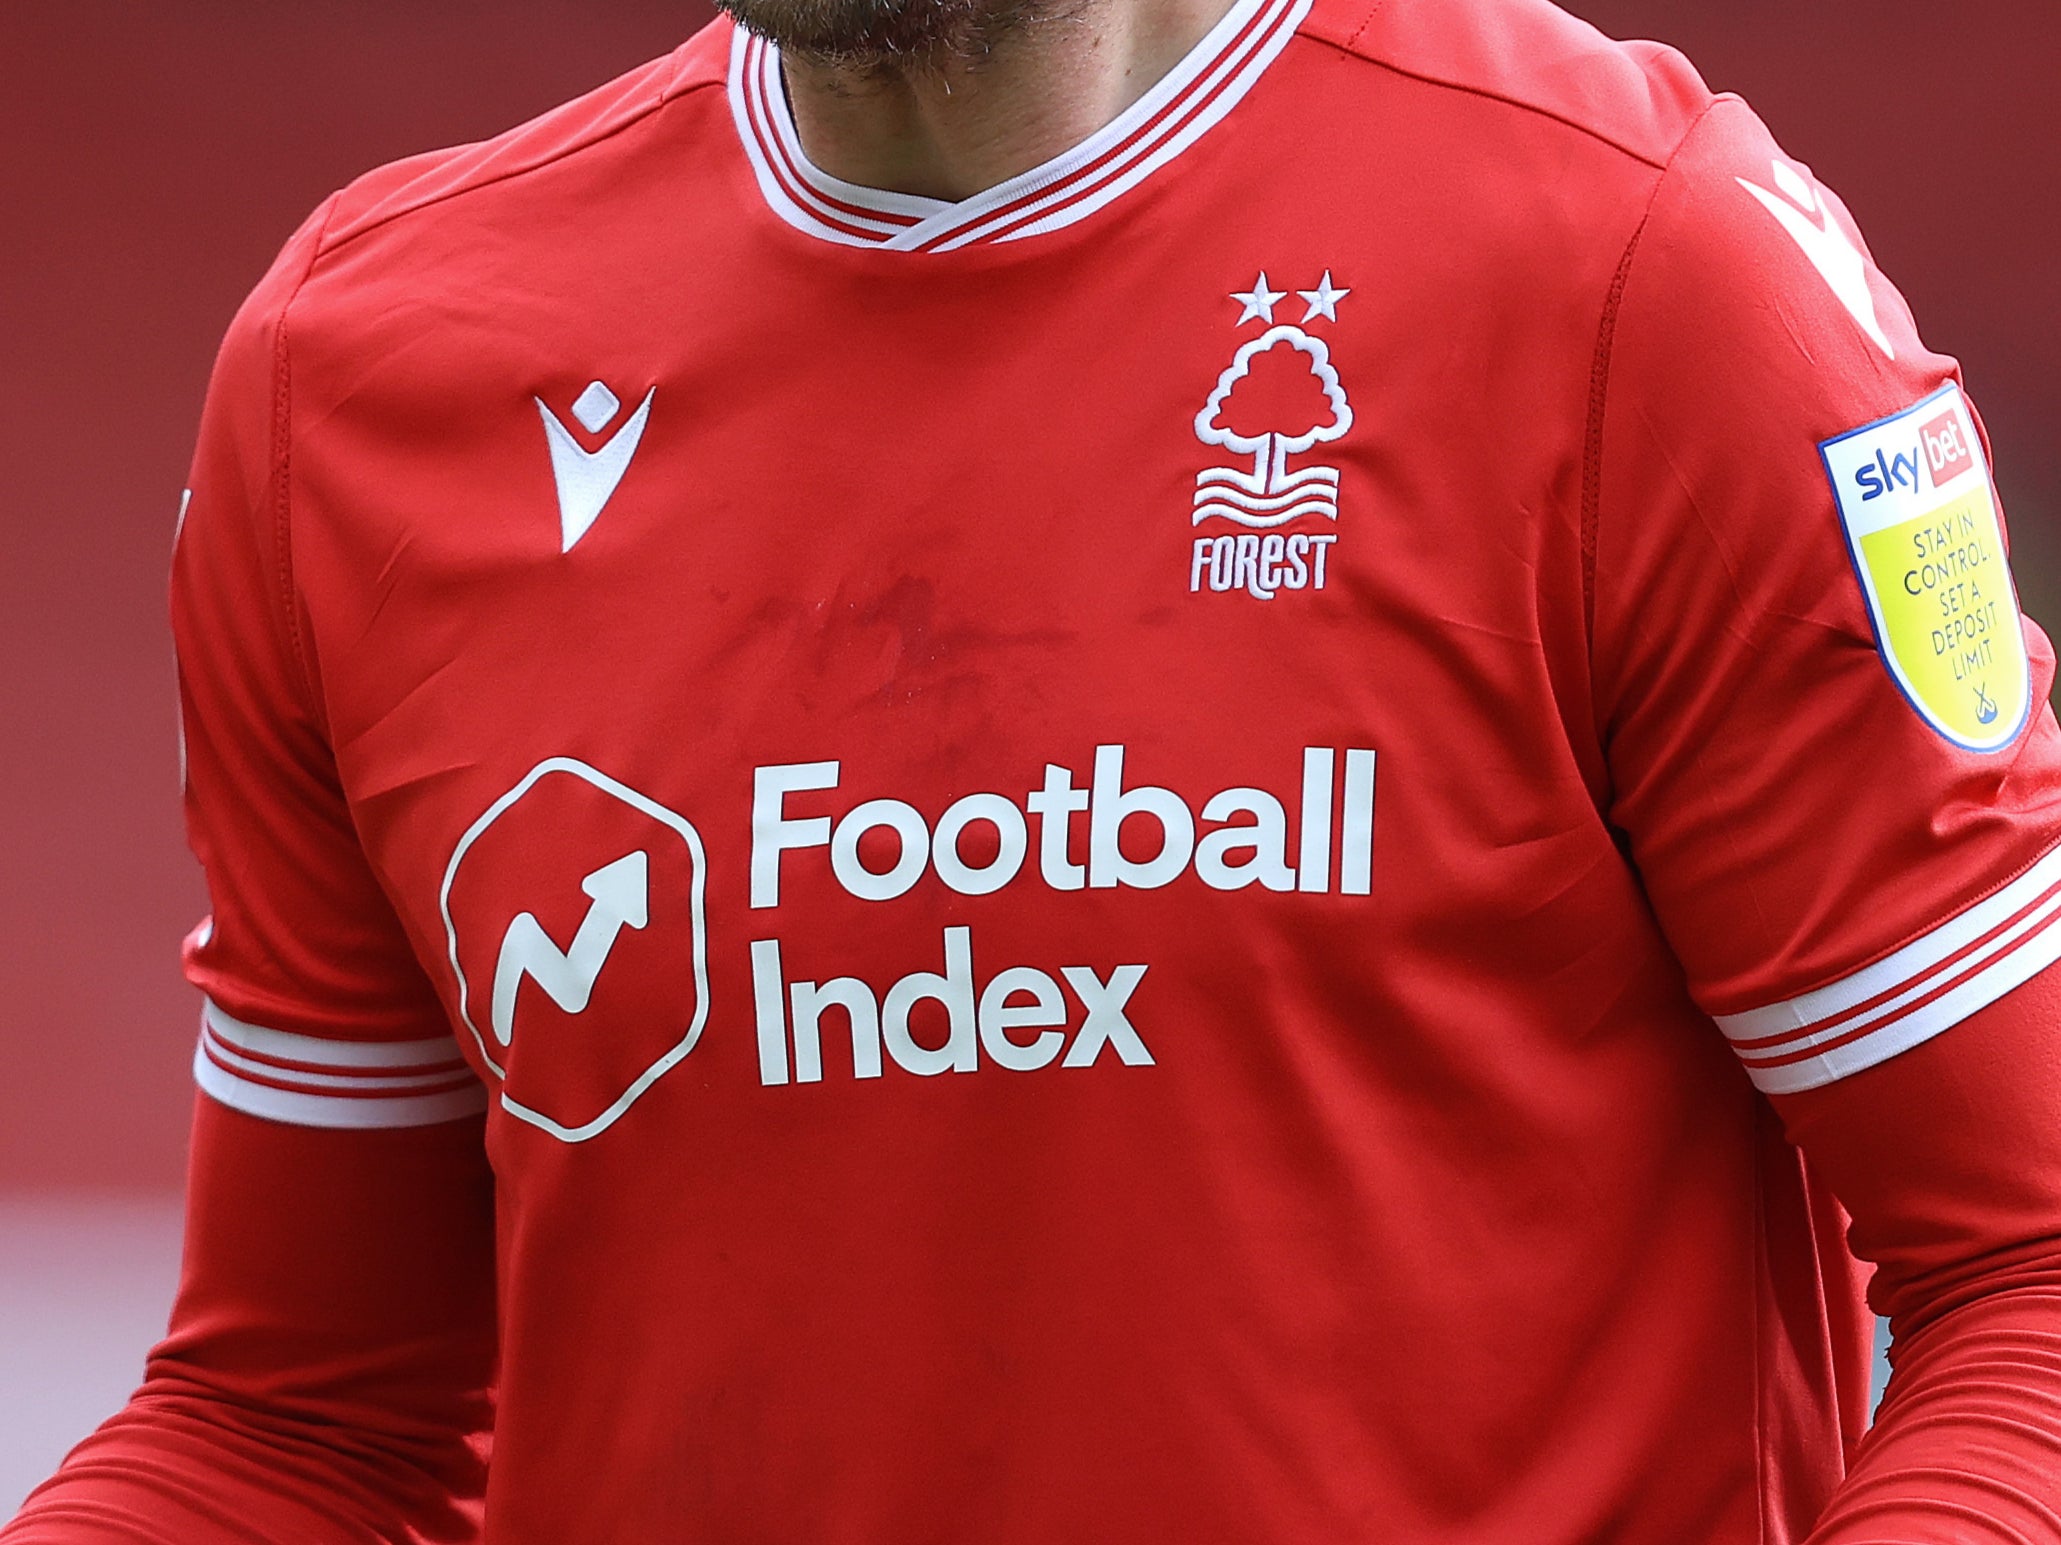 <p>Football Index has sponsored a number of teams in the Football League</p>